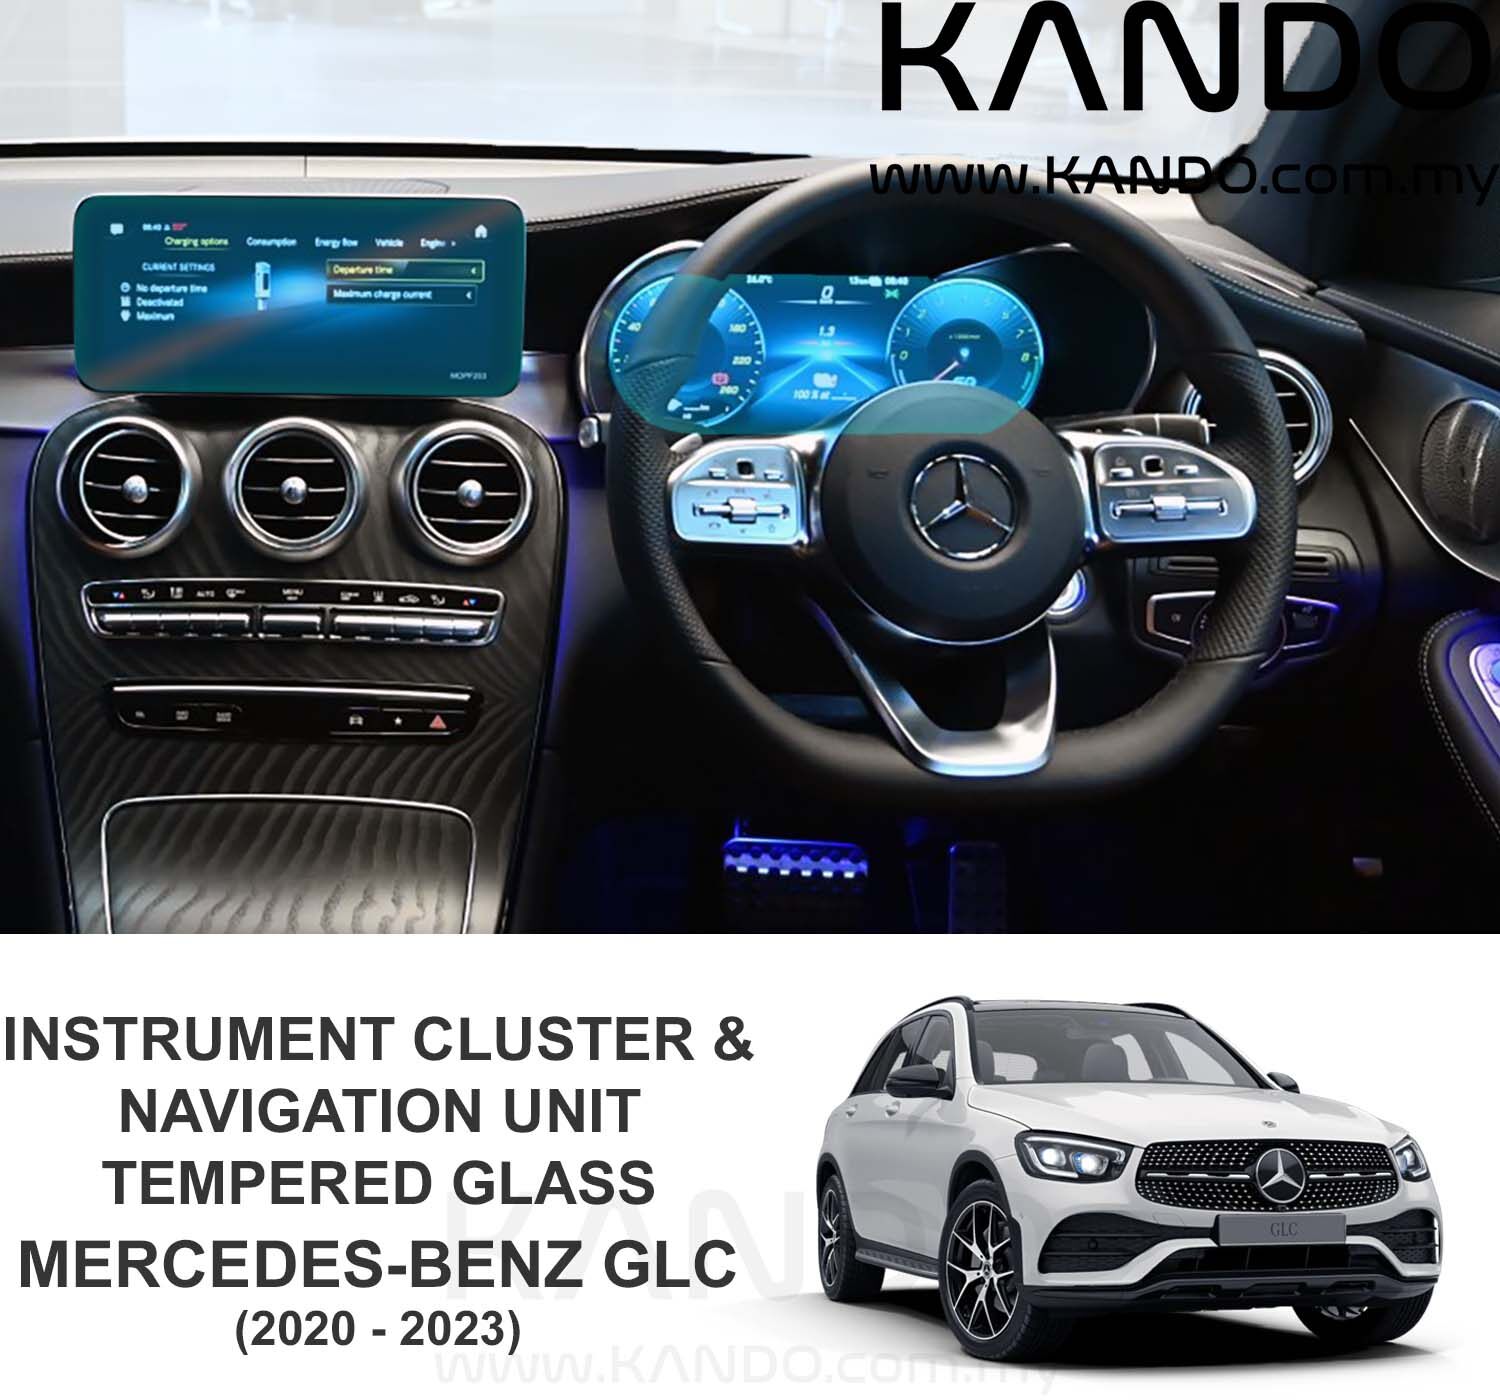 Mercedes Benz GLC Tempered Glass Protector Mercedes GLC Tempered Glass Protector GLC GPS Screen Mercedes GLC Tempered Glass Mercedes GLC Tempered Glass Benz GLC Tempered Glass Benz GLC Tempered Glass Mercedes Tempered Glass